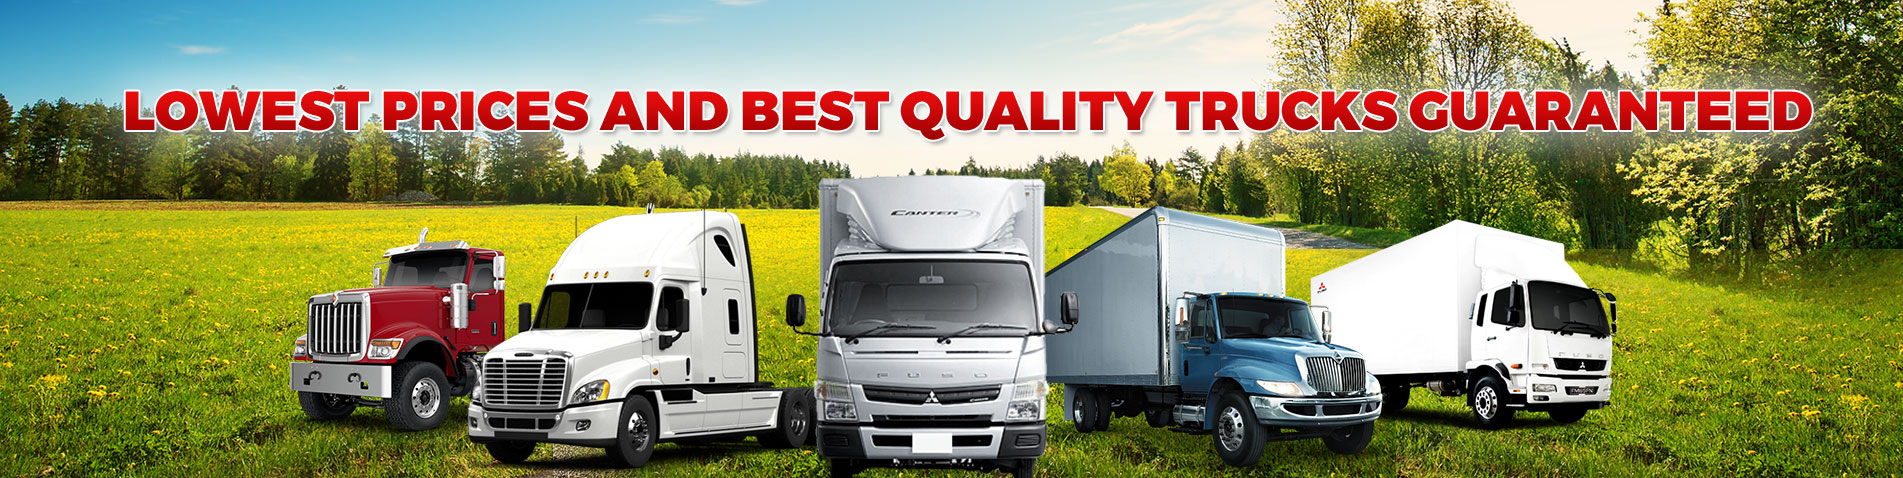 lowest prices and best quality trucks guaranteed